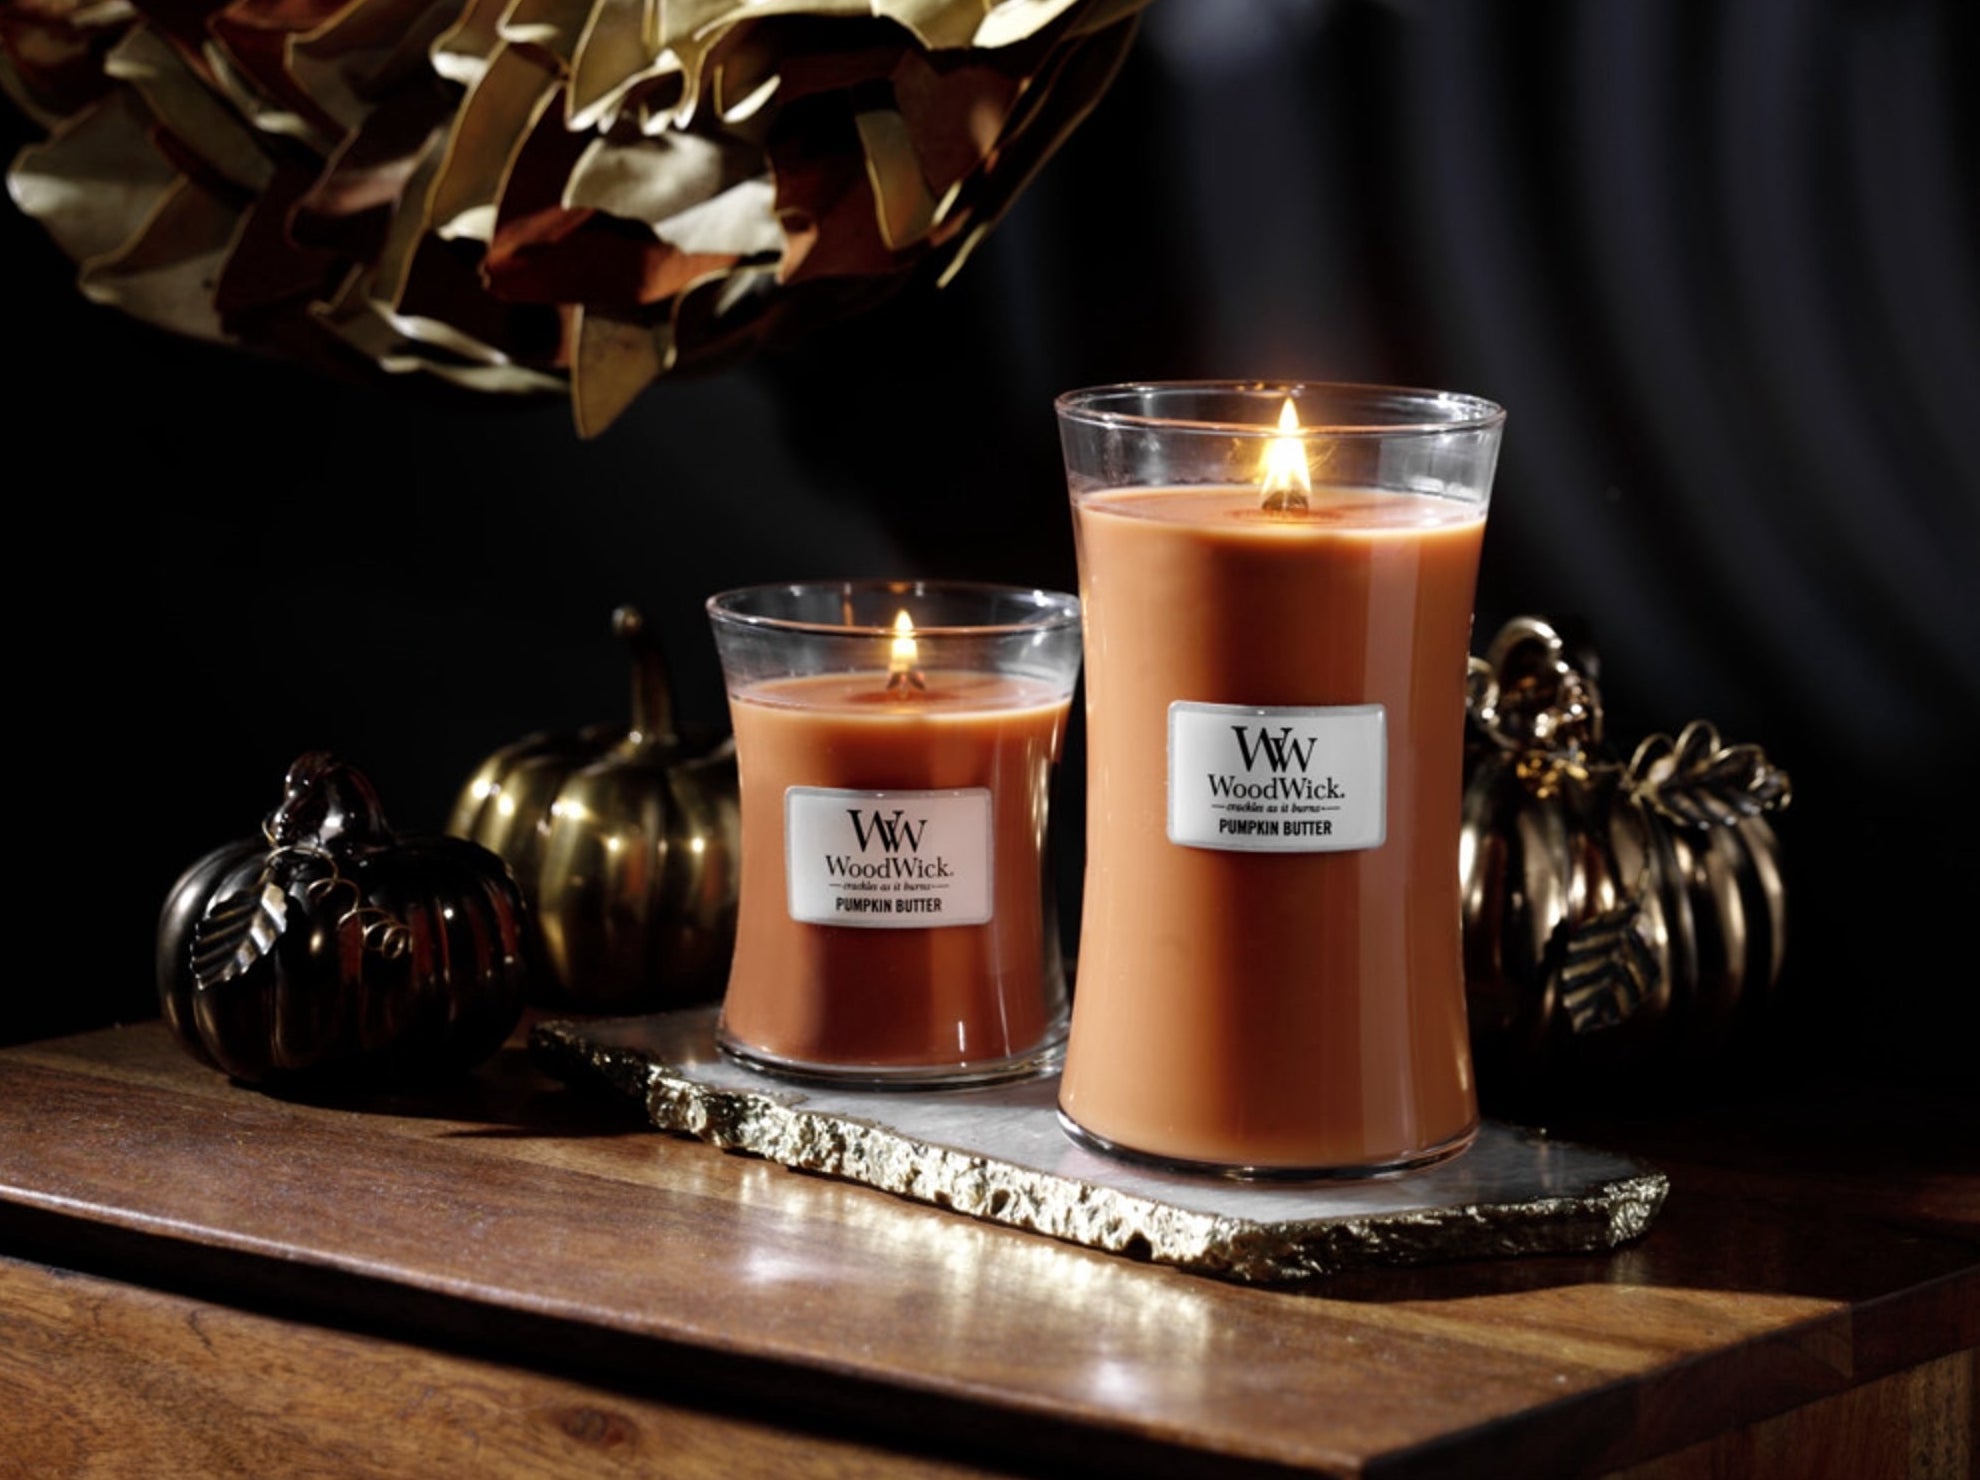 The medium and large pumpkin butter candles